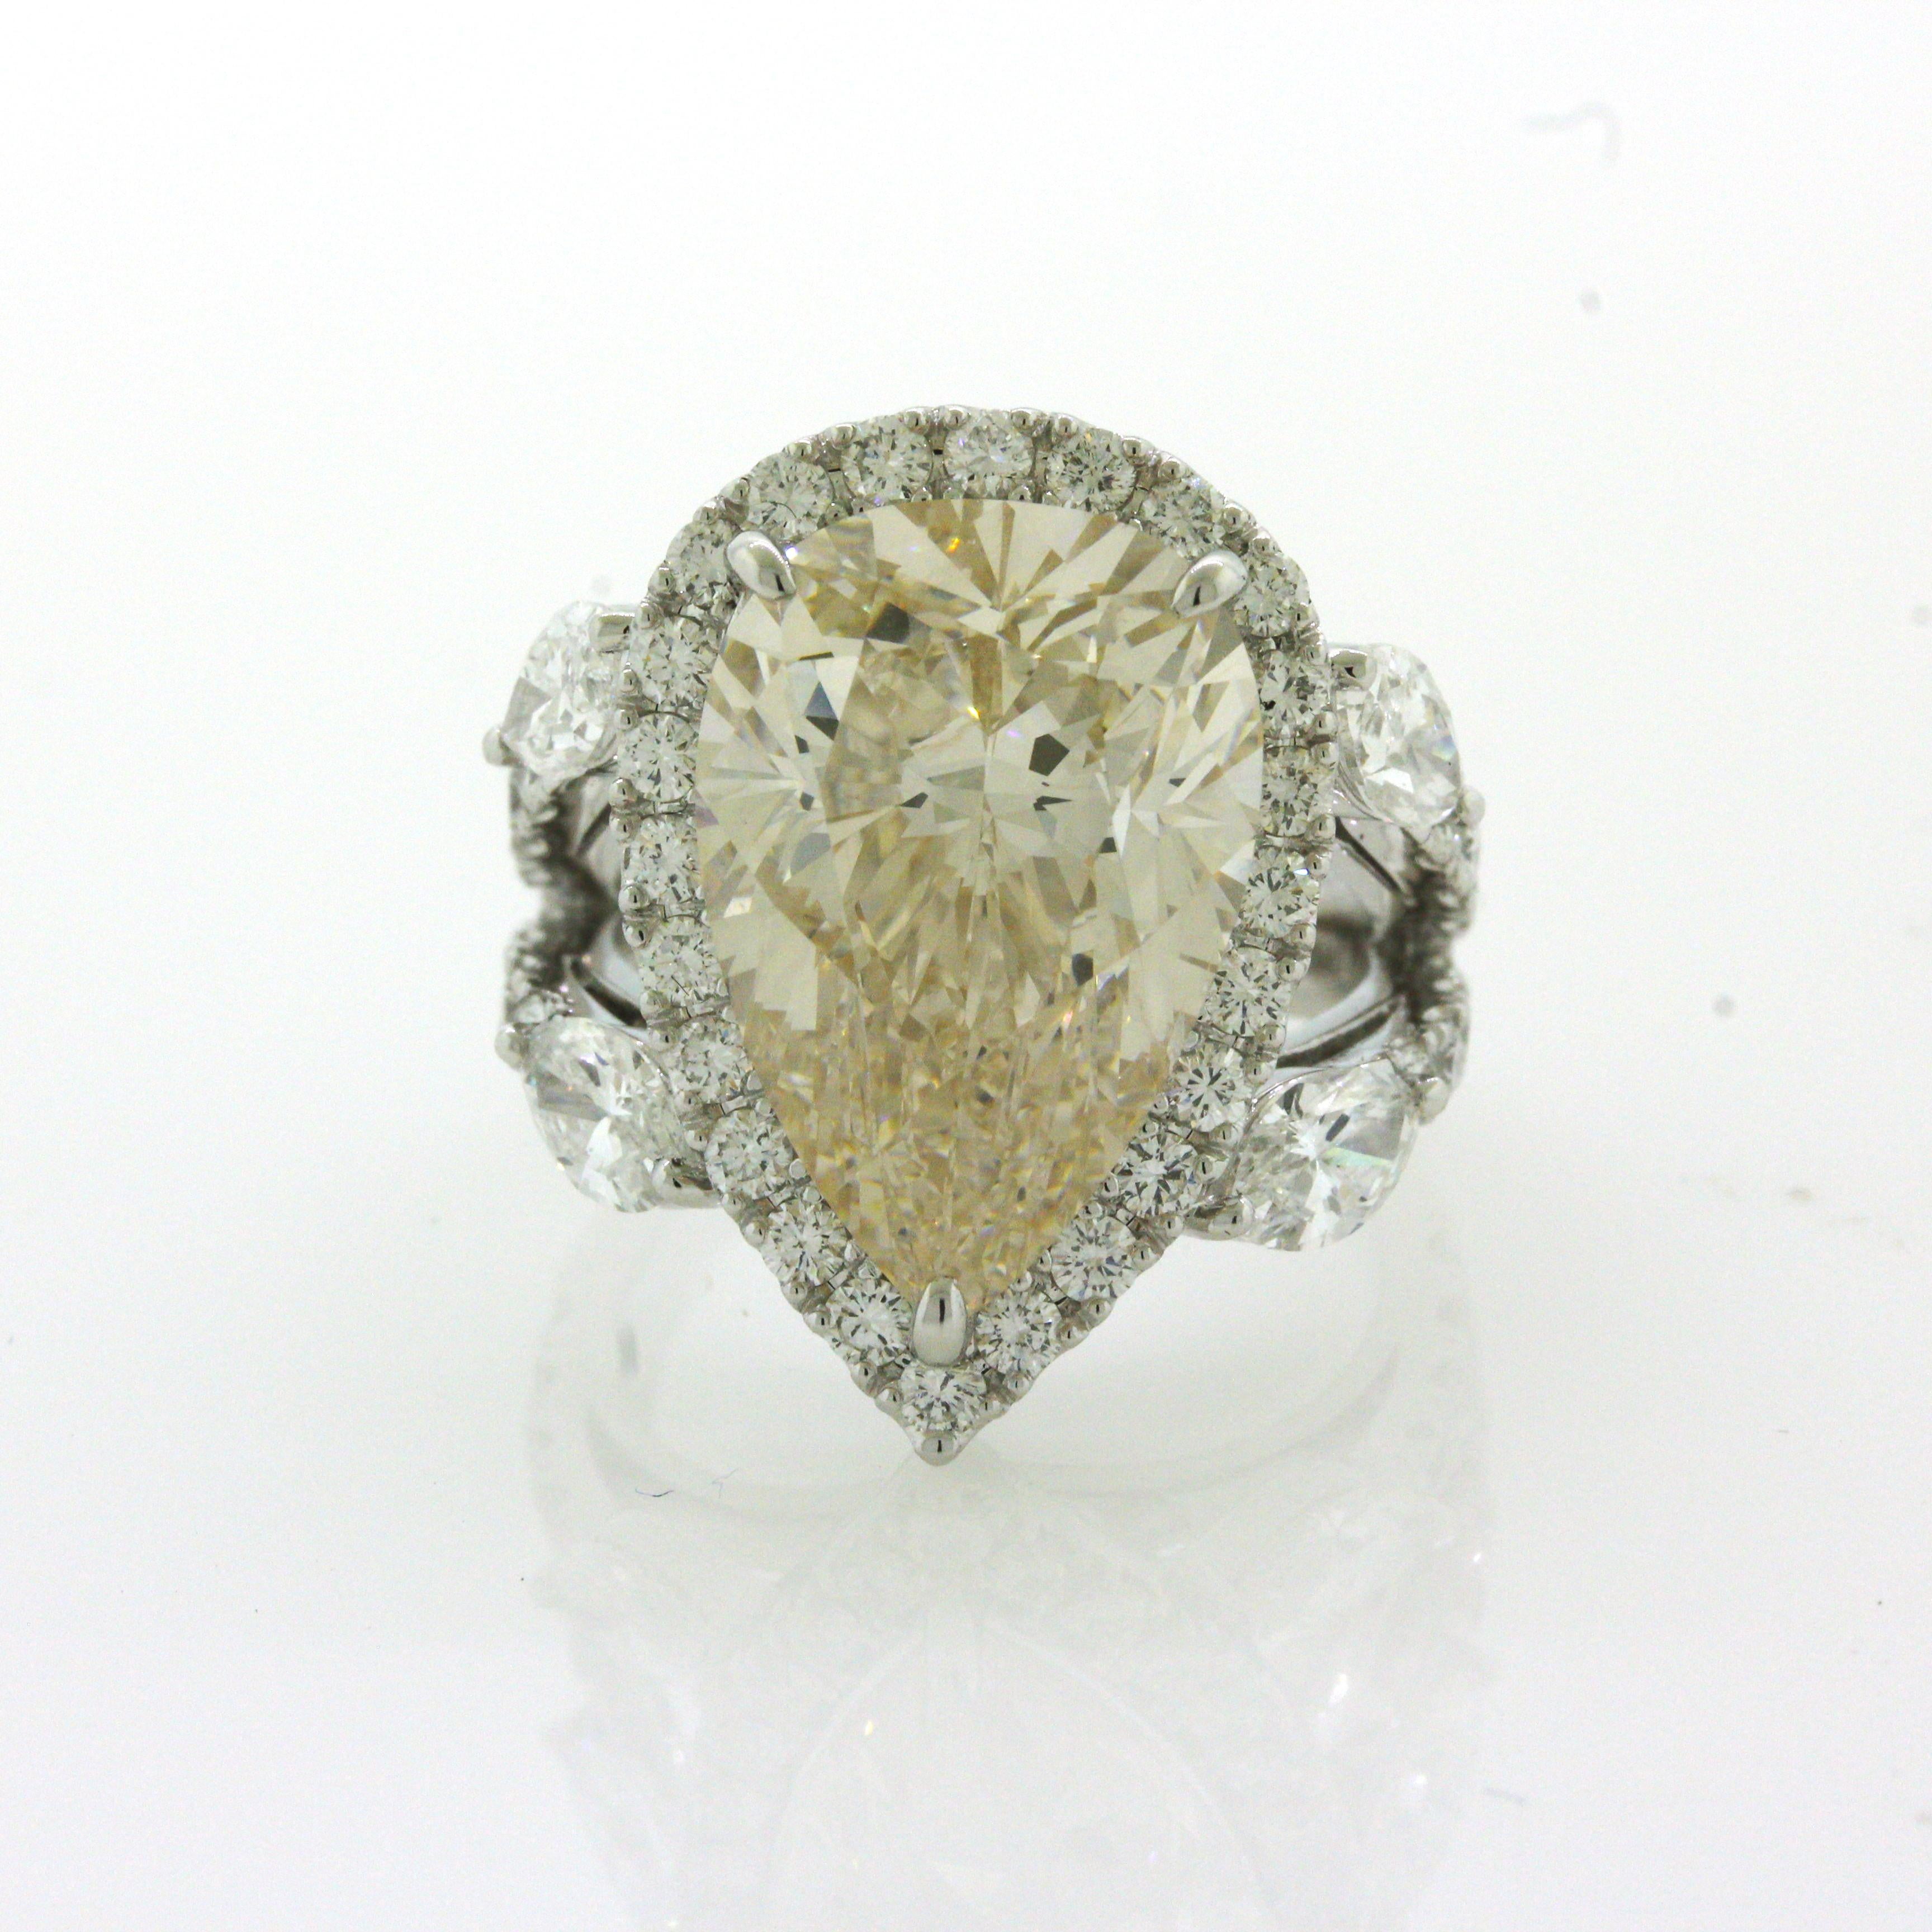 10.16 Carat Diamond Platinum Ring, GIA Certified Type 2a In New Condition For Sale In Beverly Hills, CA